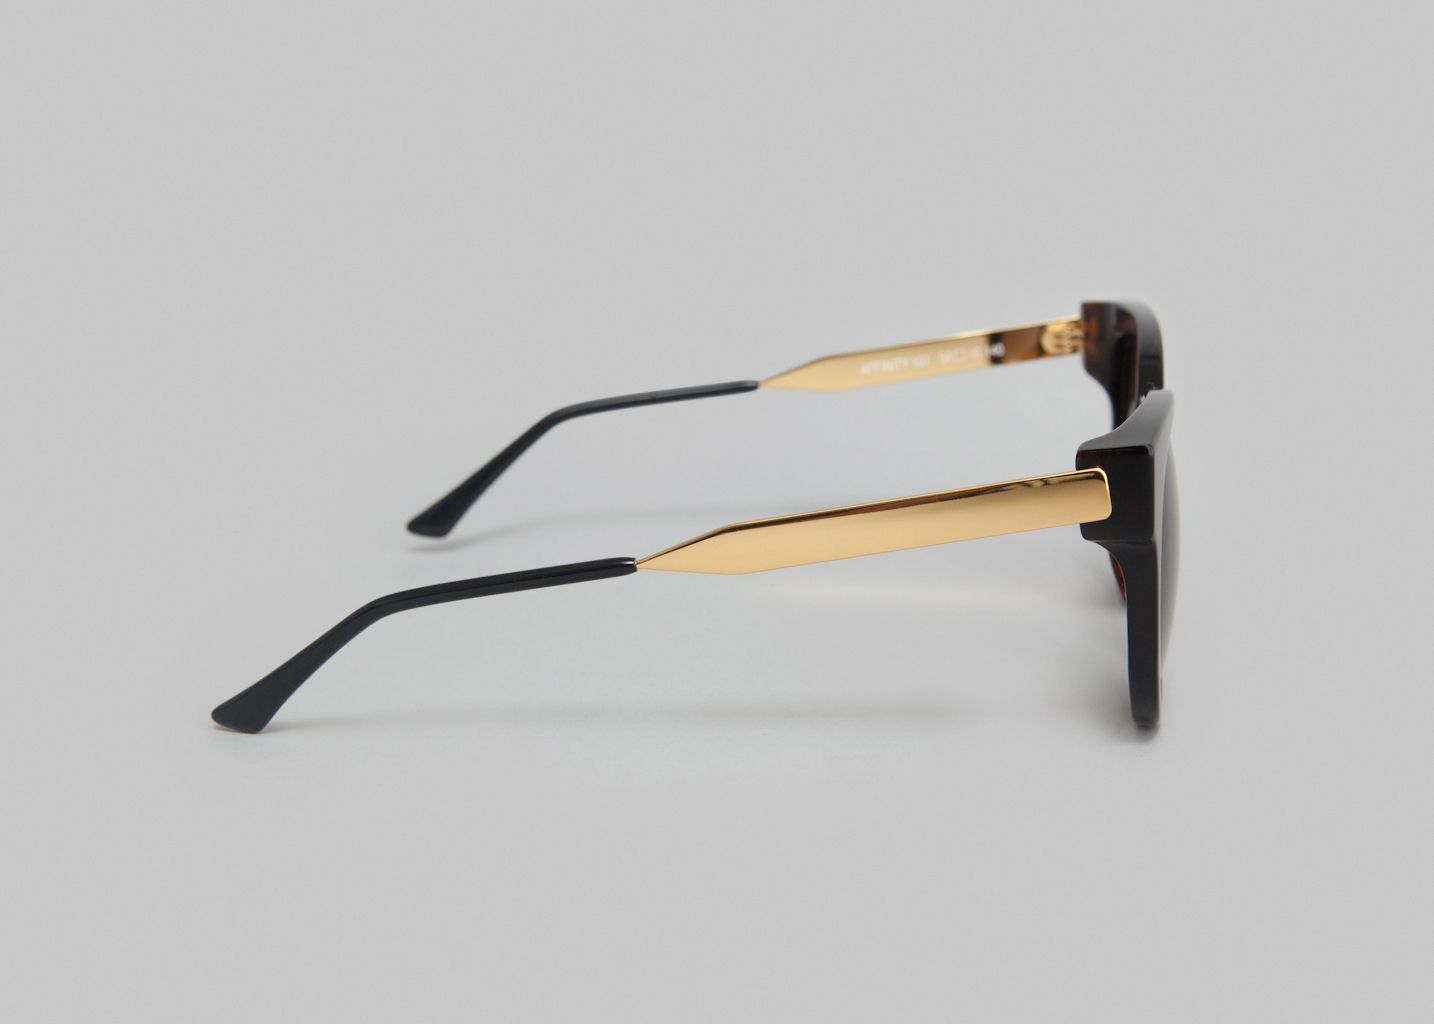 Lunettes Snobby - Thierry Lasry